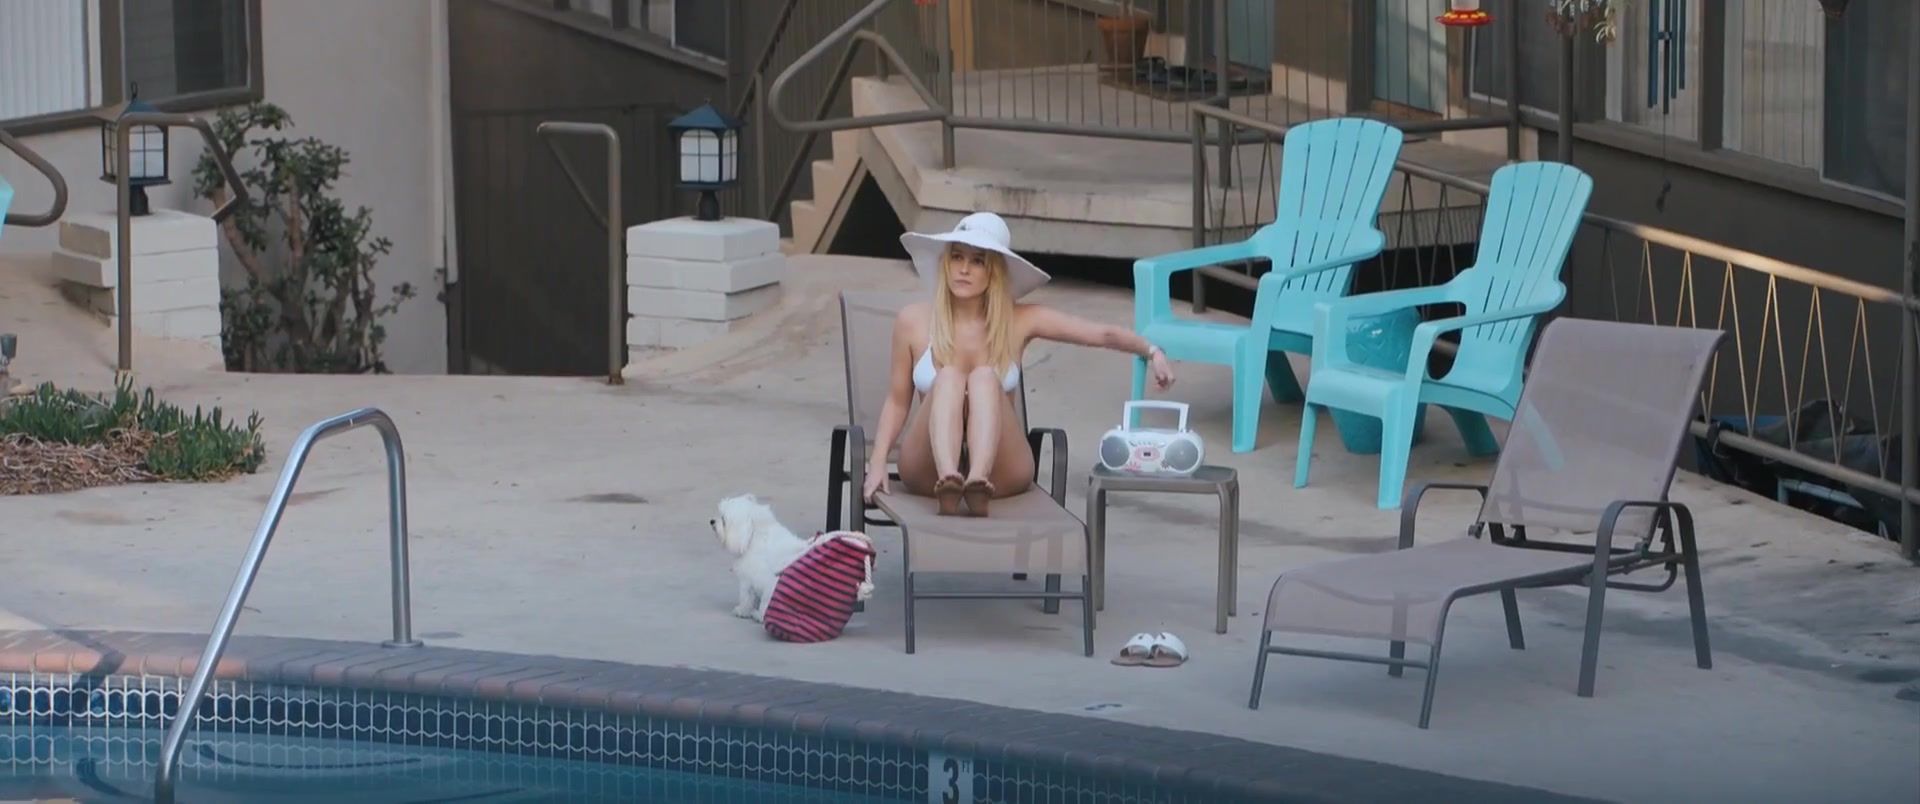 Fist Wendy Vanden Heuvel, Riley Keough nude - Under the Silver Lake (2018) Blowjob Contest